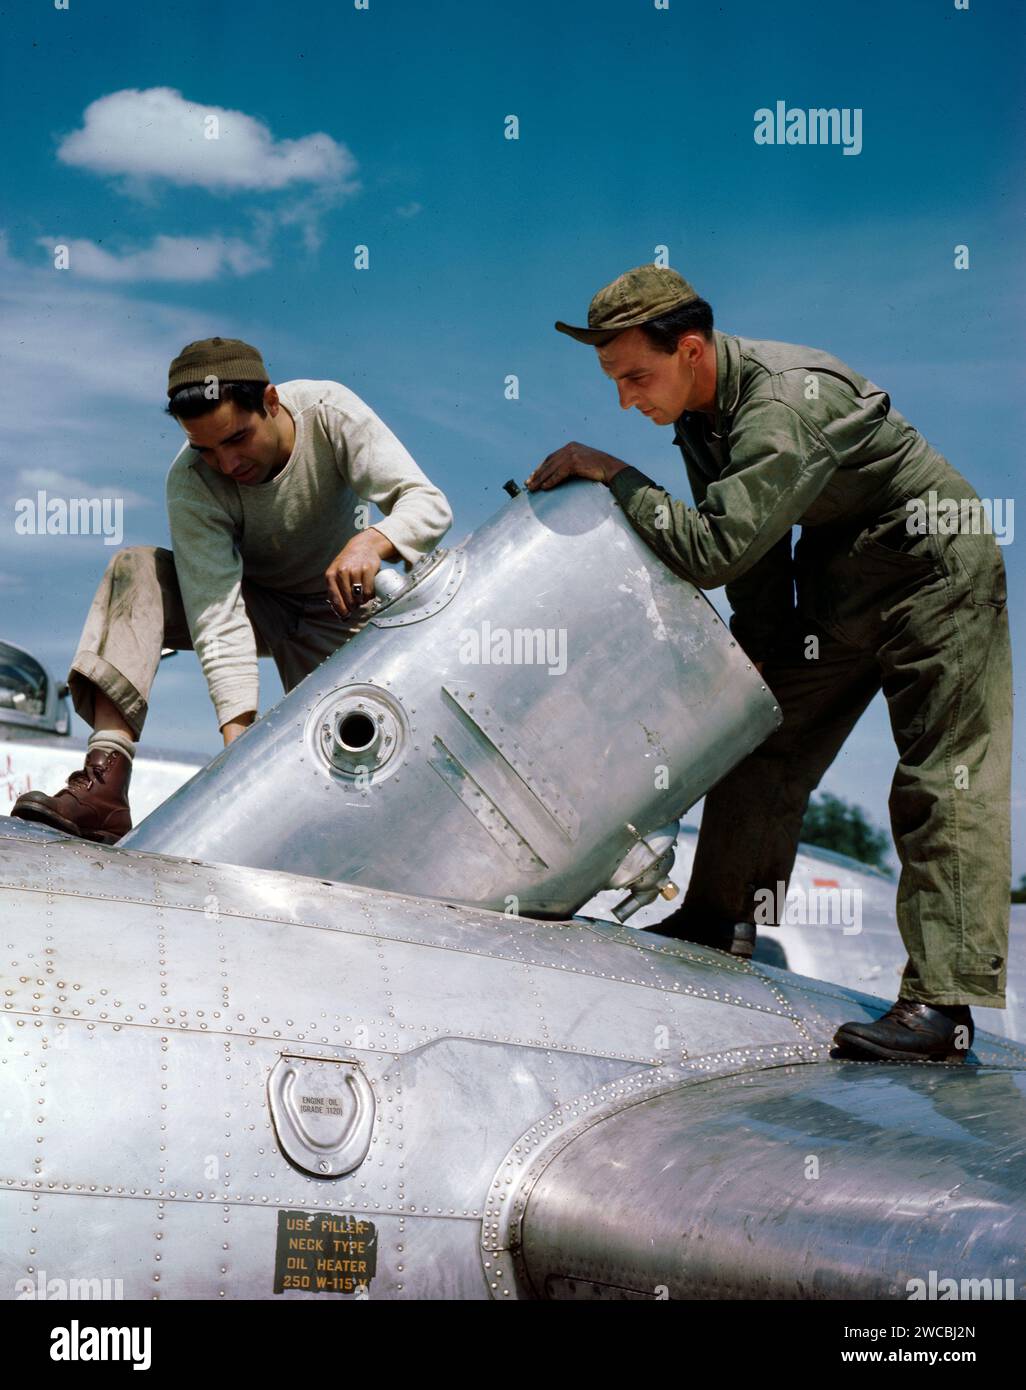 Replacing an oil tank in a flak damaged Boeing B-17 at a base in England during World War II Stock Photo